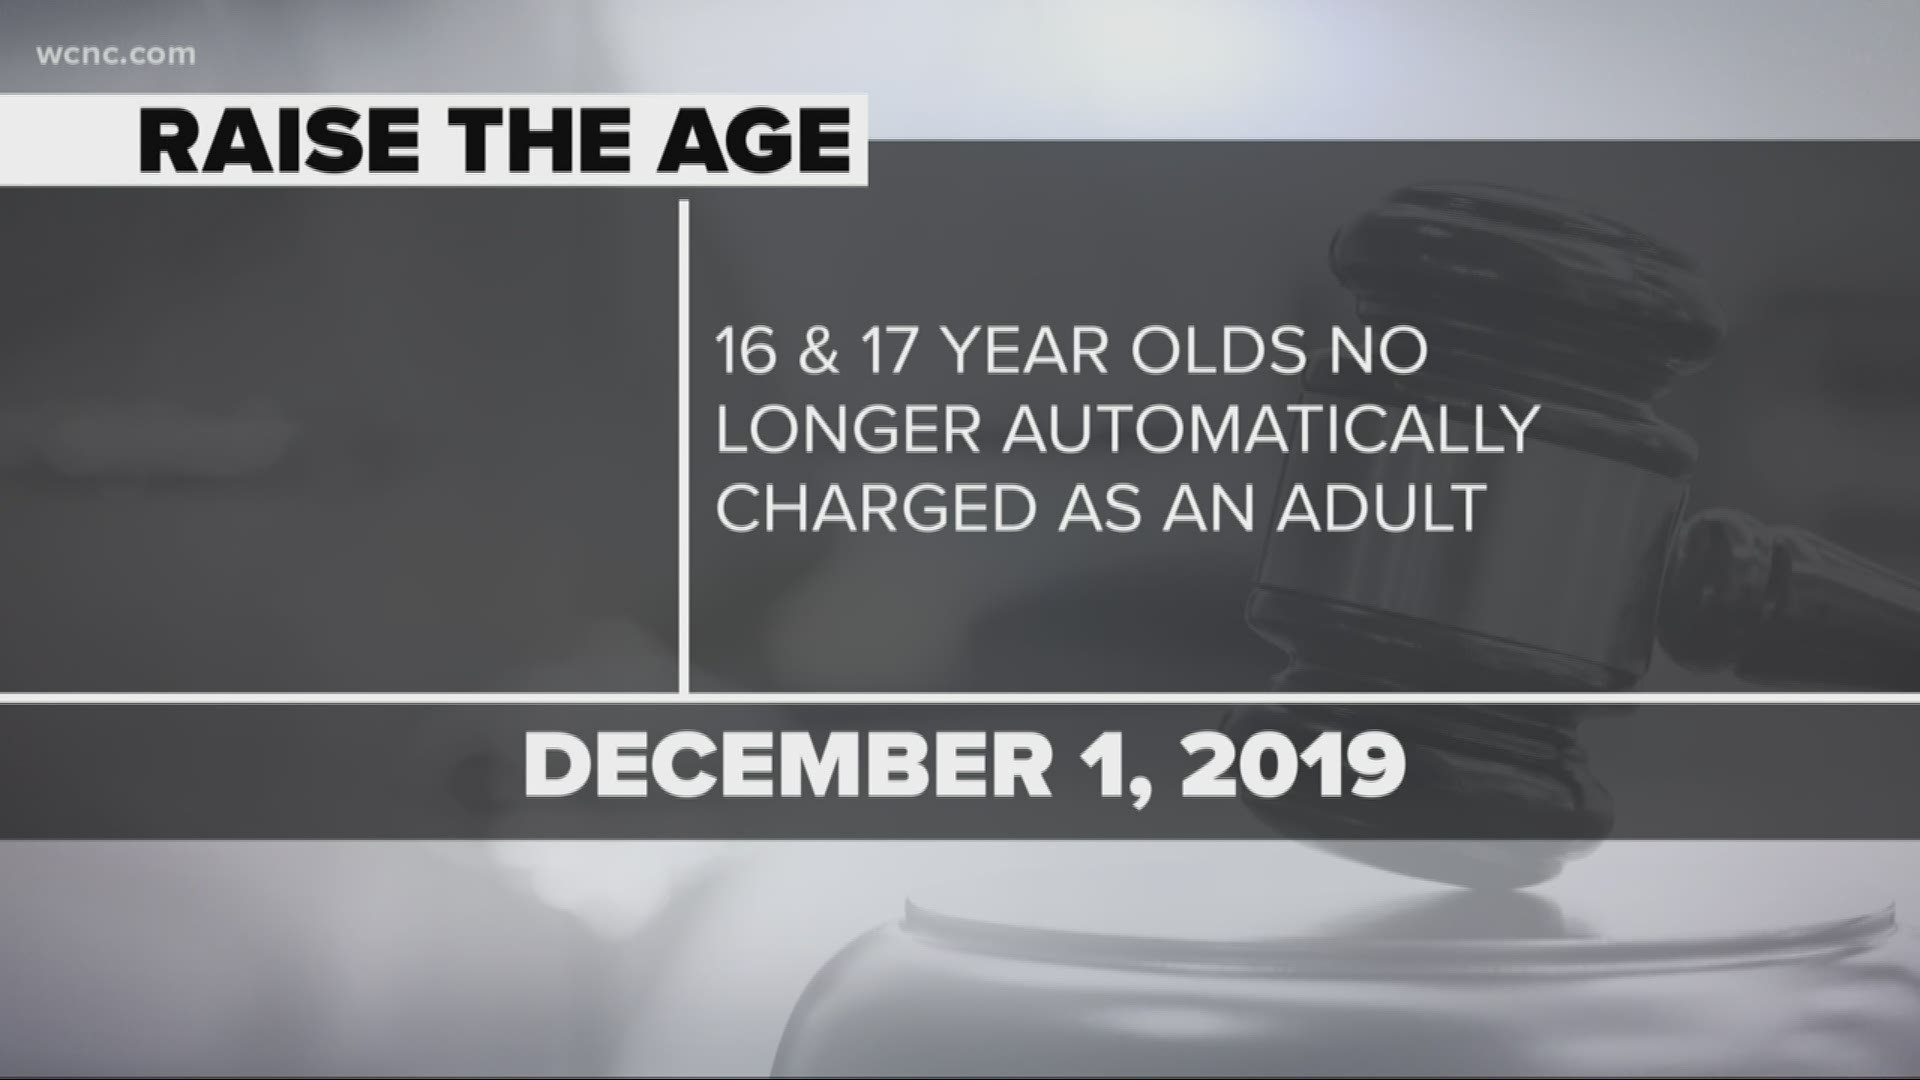 It comes two years after lawmakers raised the age for nonviolent crimes to 18, and after nearly a century of 16-year-old's being treated as adults.